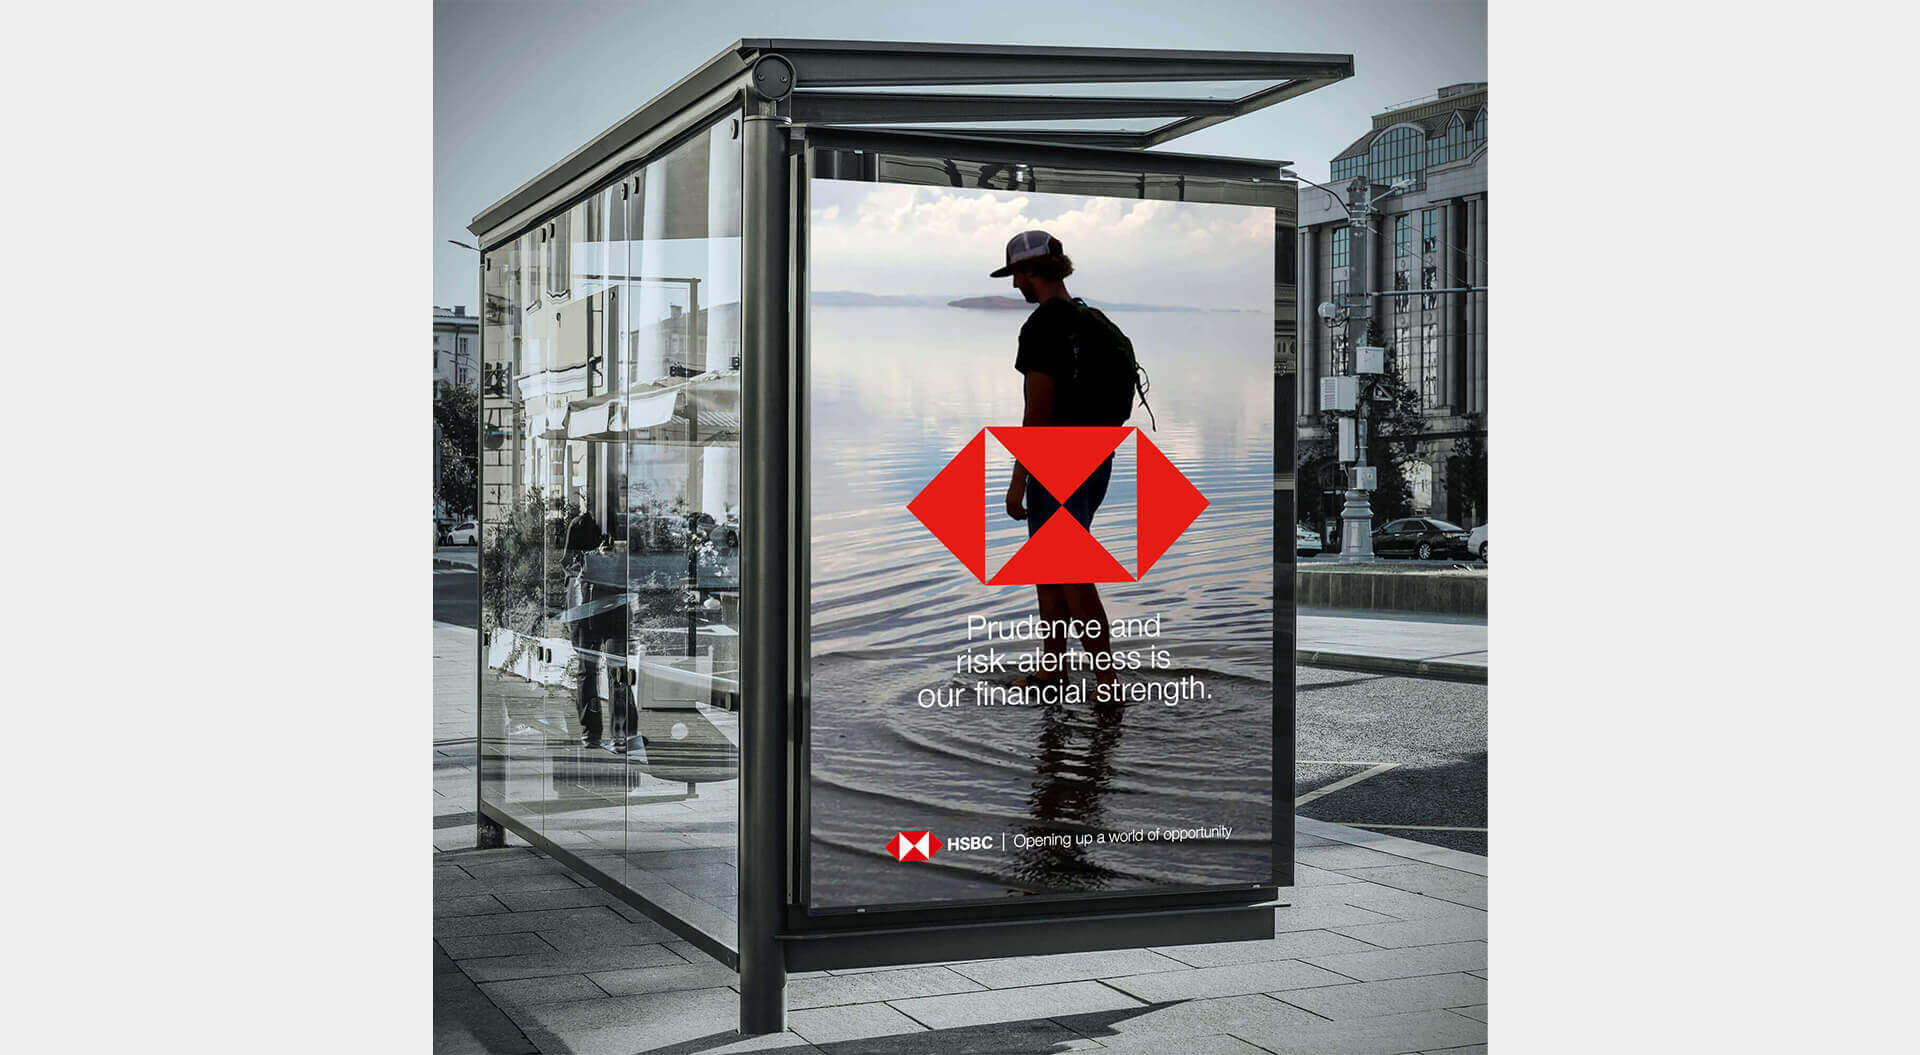 HSBC Bank Advertising design bus stop. Message, “Prudence and risk-alertness is our financial strength” - logo design - strapline “Opening up a world of opportunity”